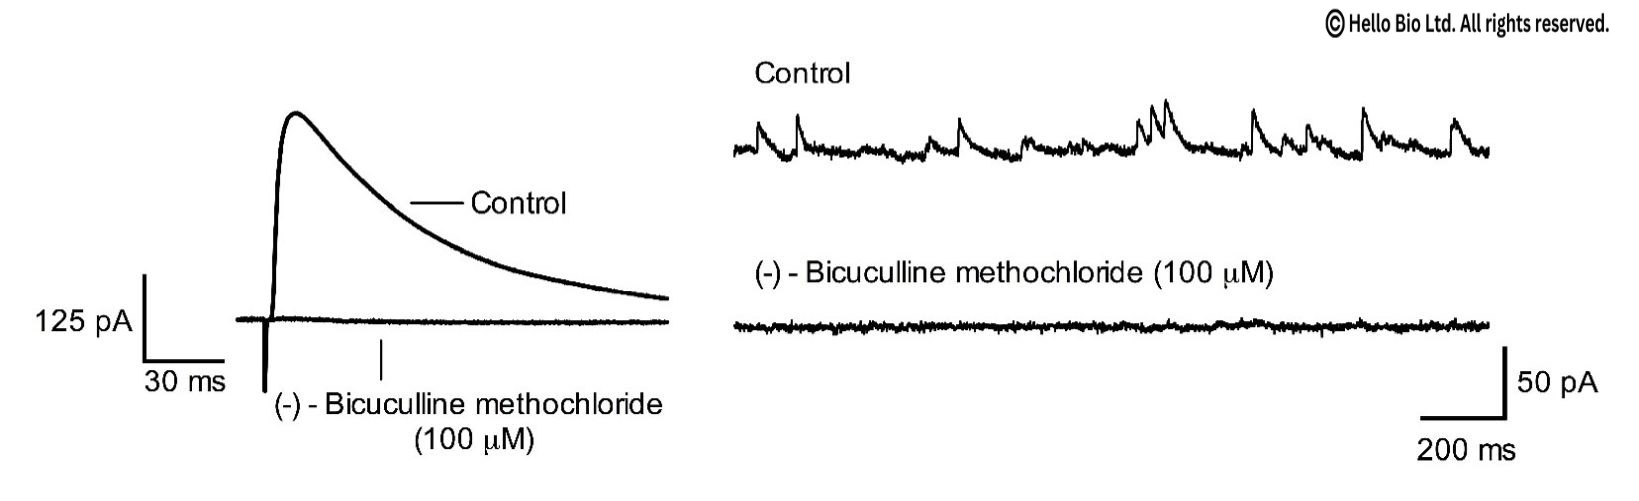 Figure 1. Bicuculline methochloride inhibition of evoked and spontaneous GABAA-R mediated IPSCs in mouse cortical neurons